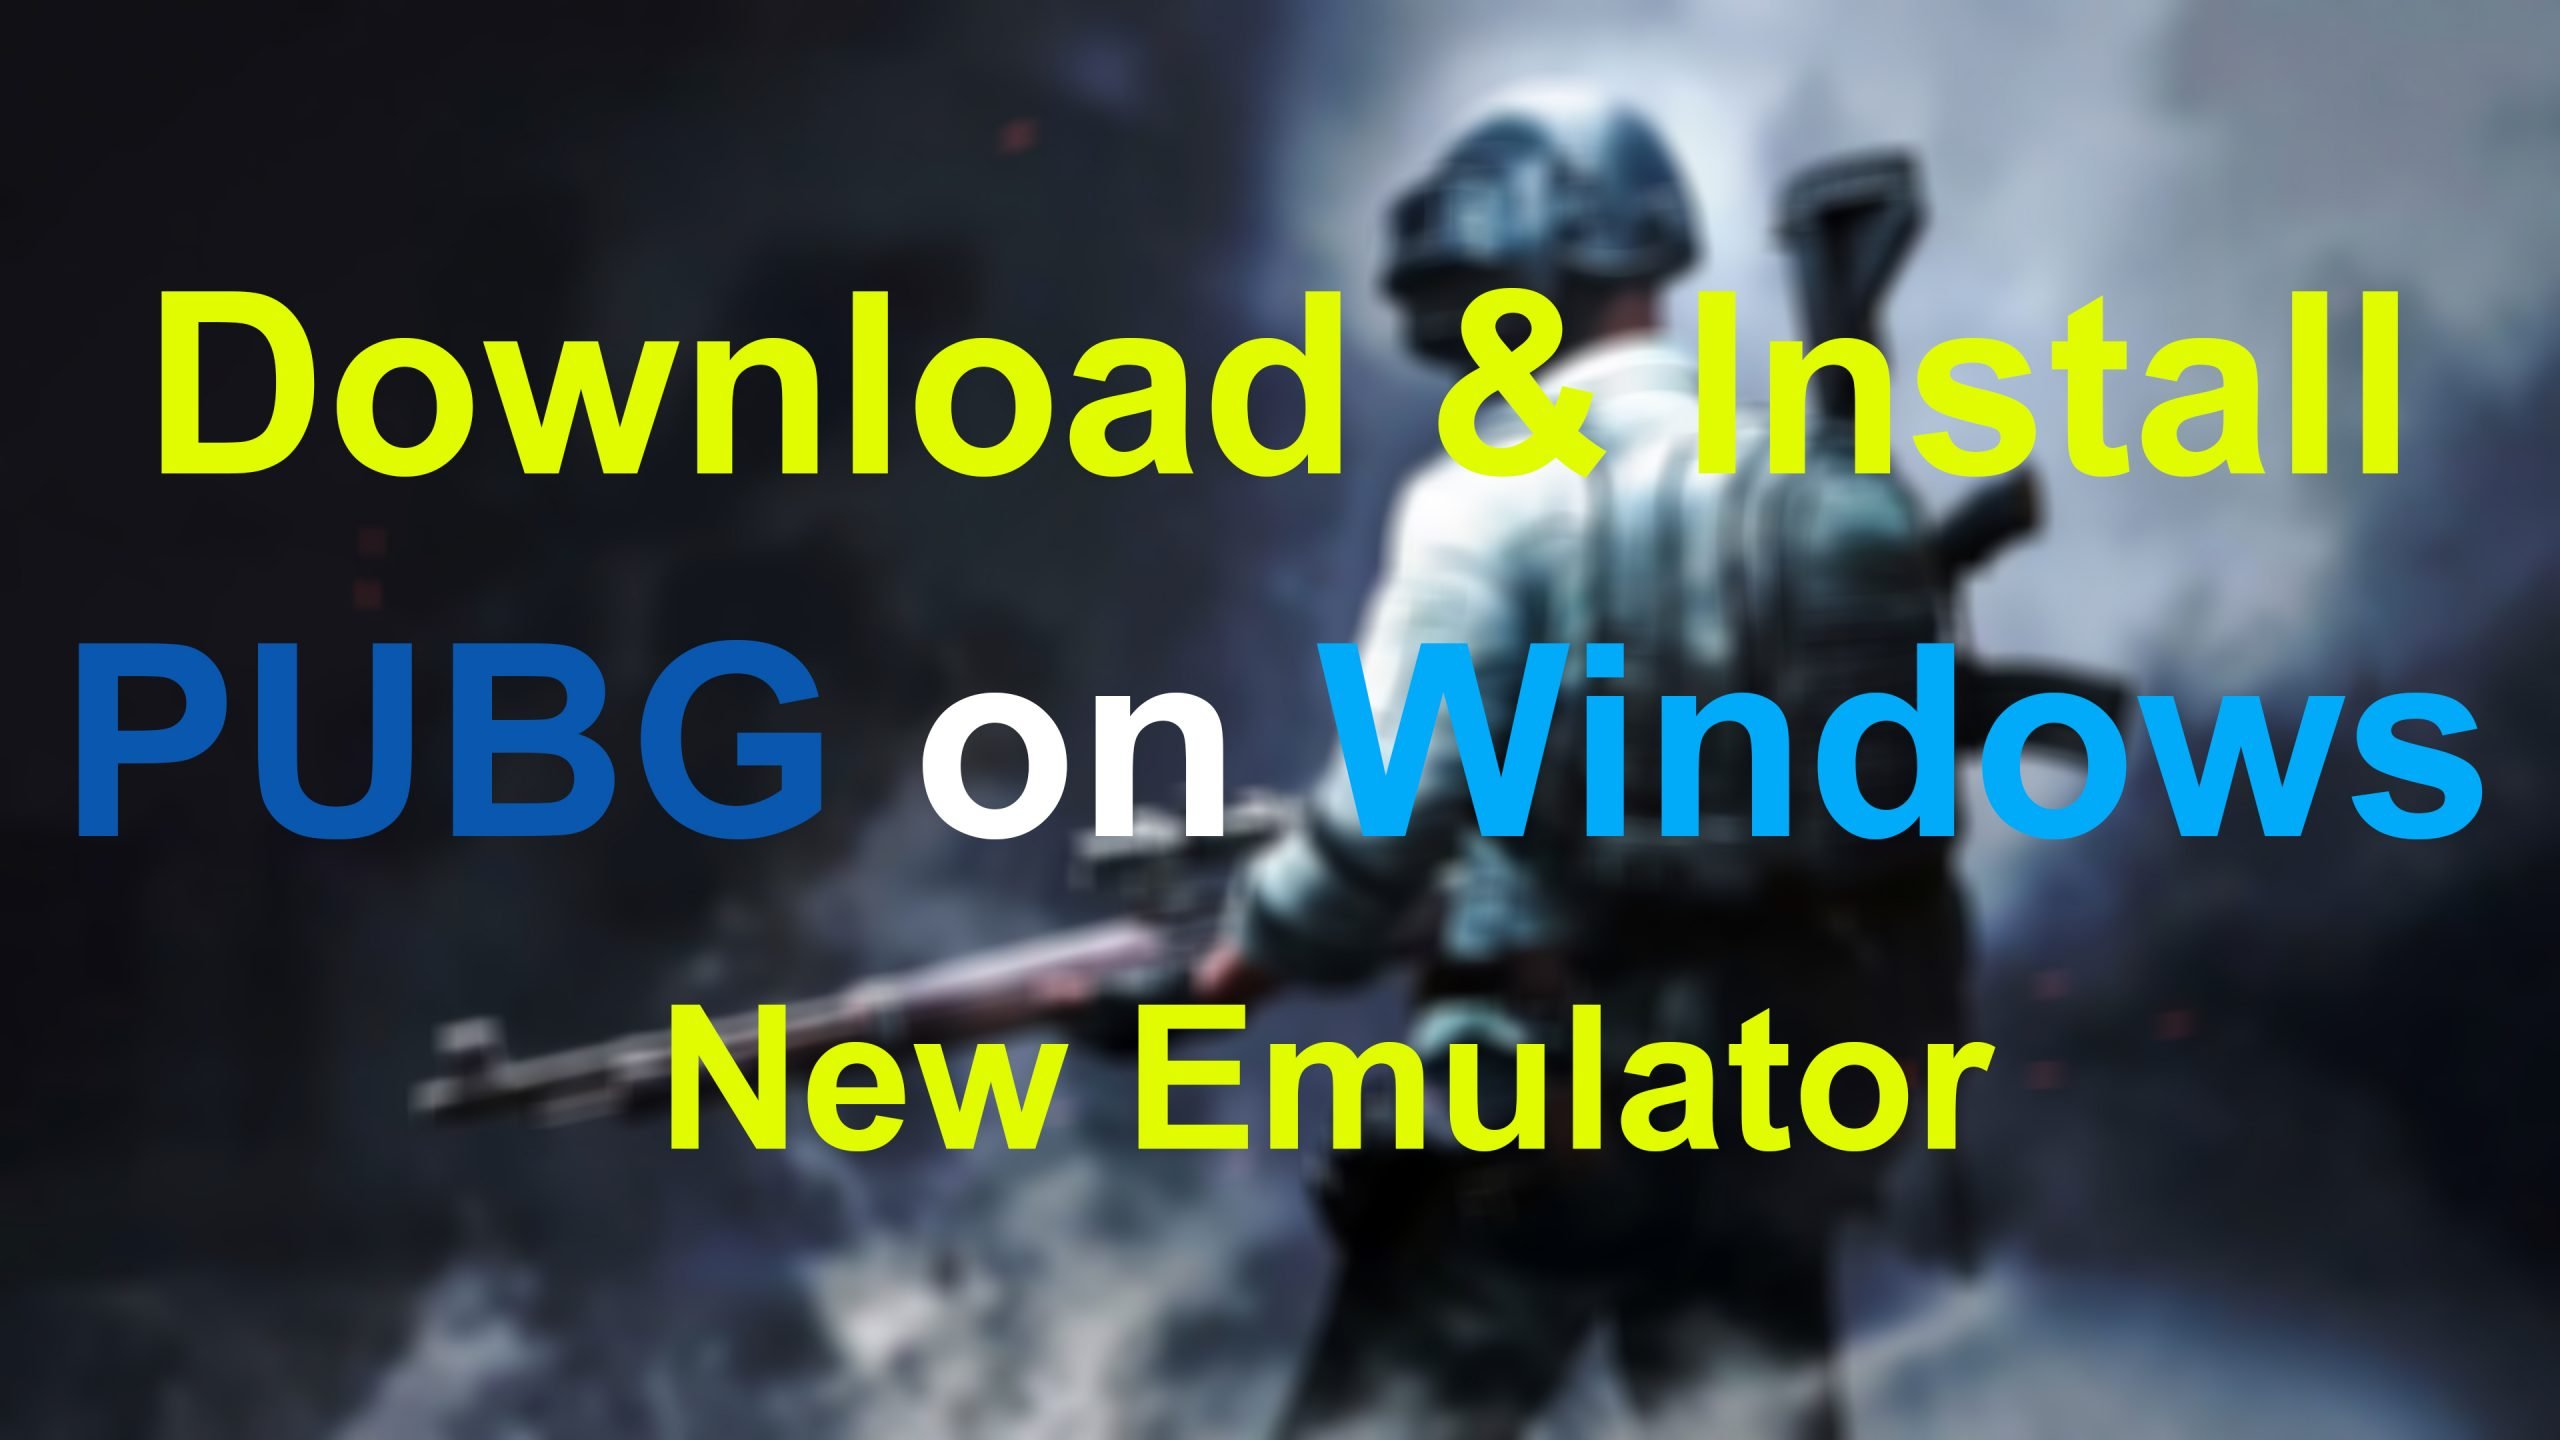 How to Download and Install PUBG Mobile on Windows on New Emulator